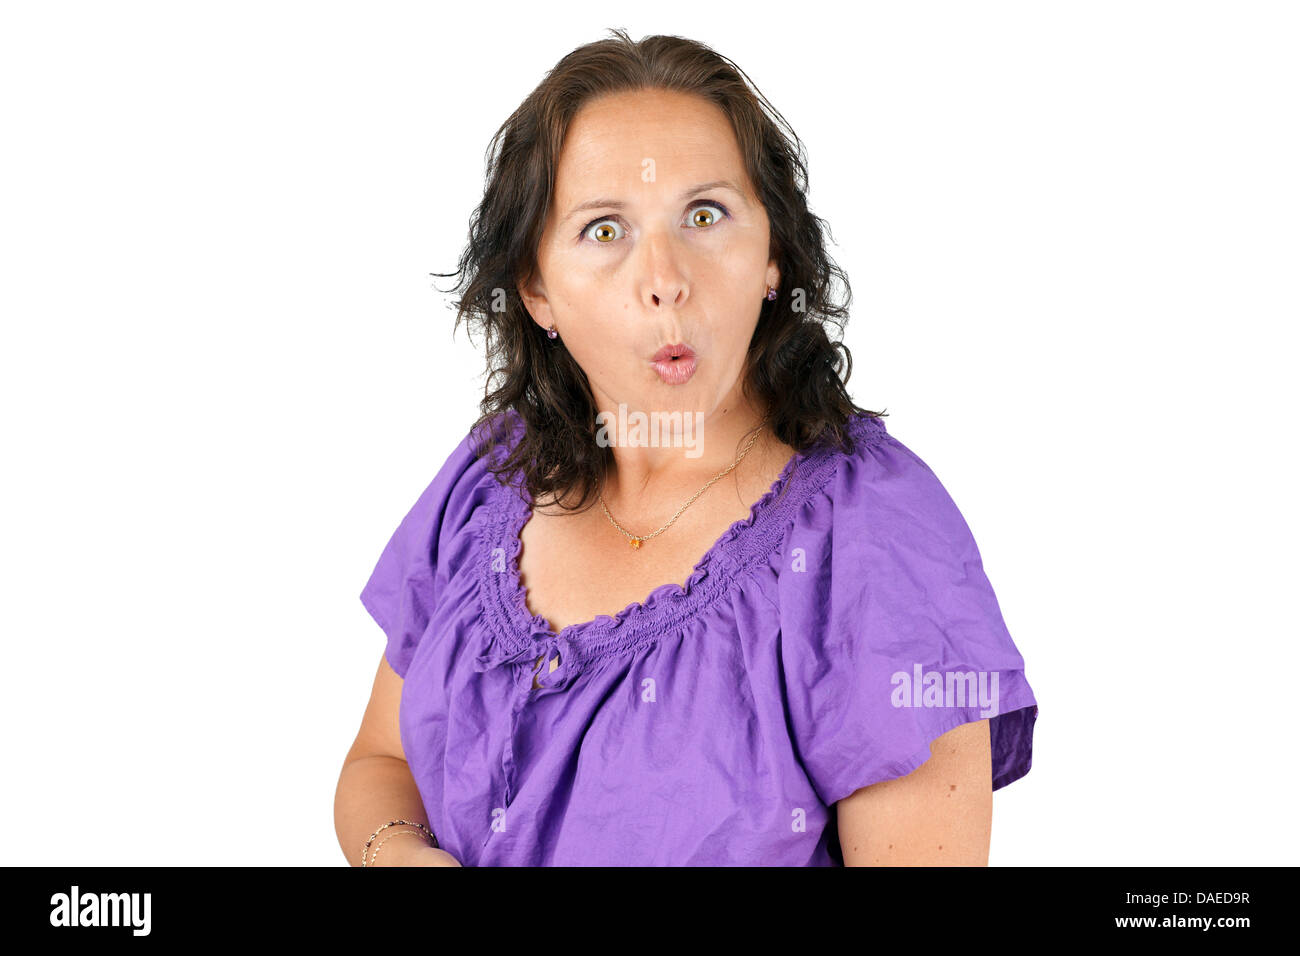 Surprised, funny faced middle age woman Stock Photo